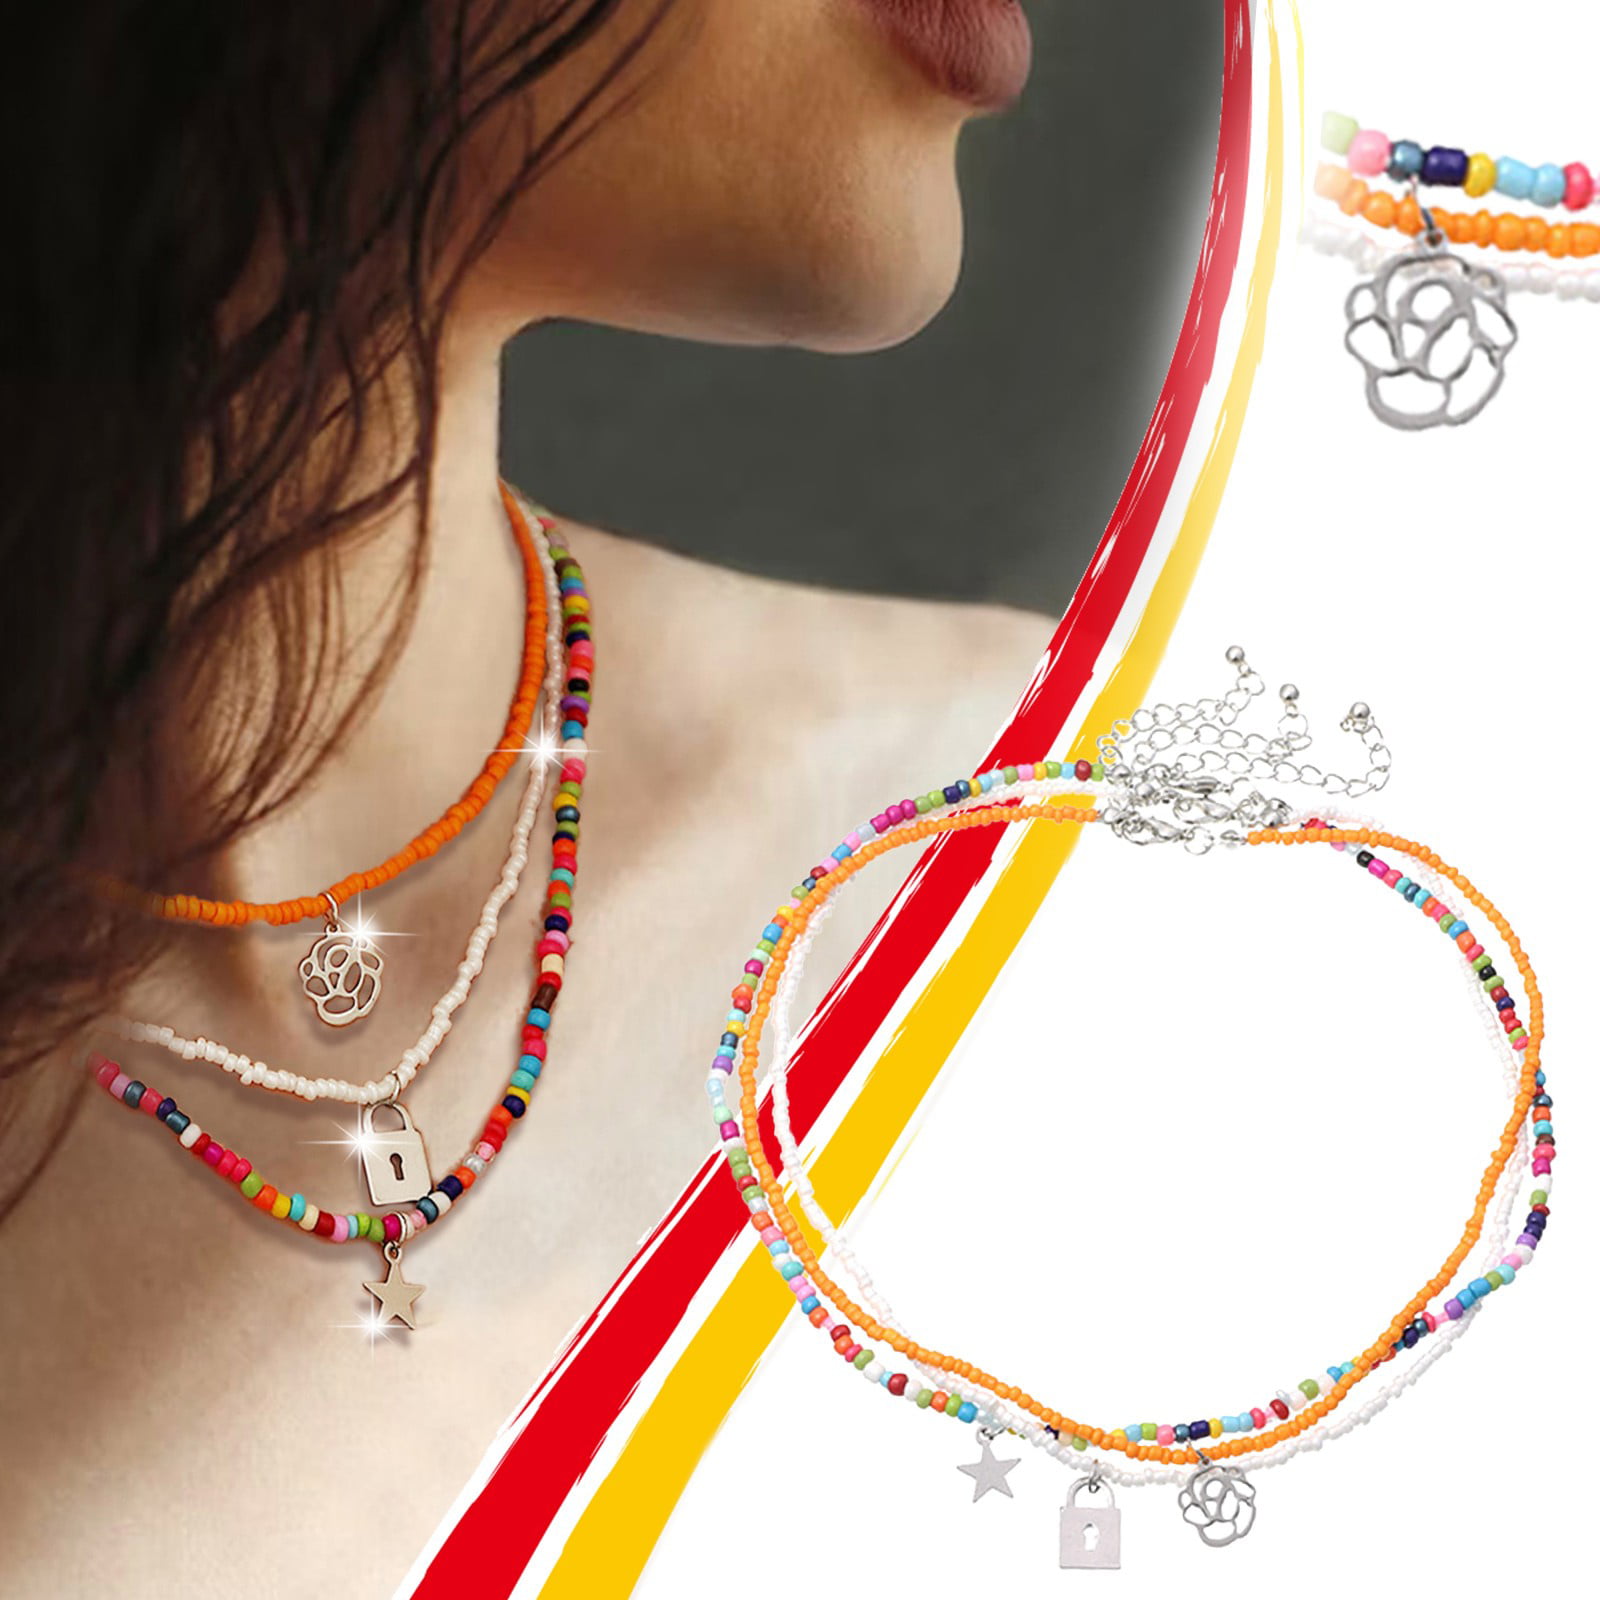 Colorful Bead Necklace - Nest Pretty Things